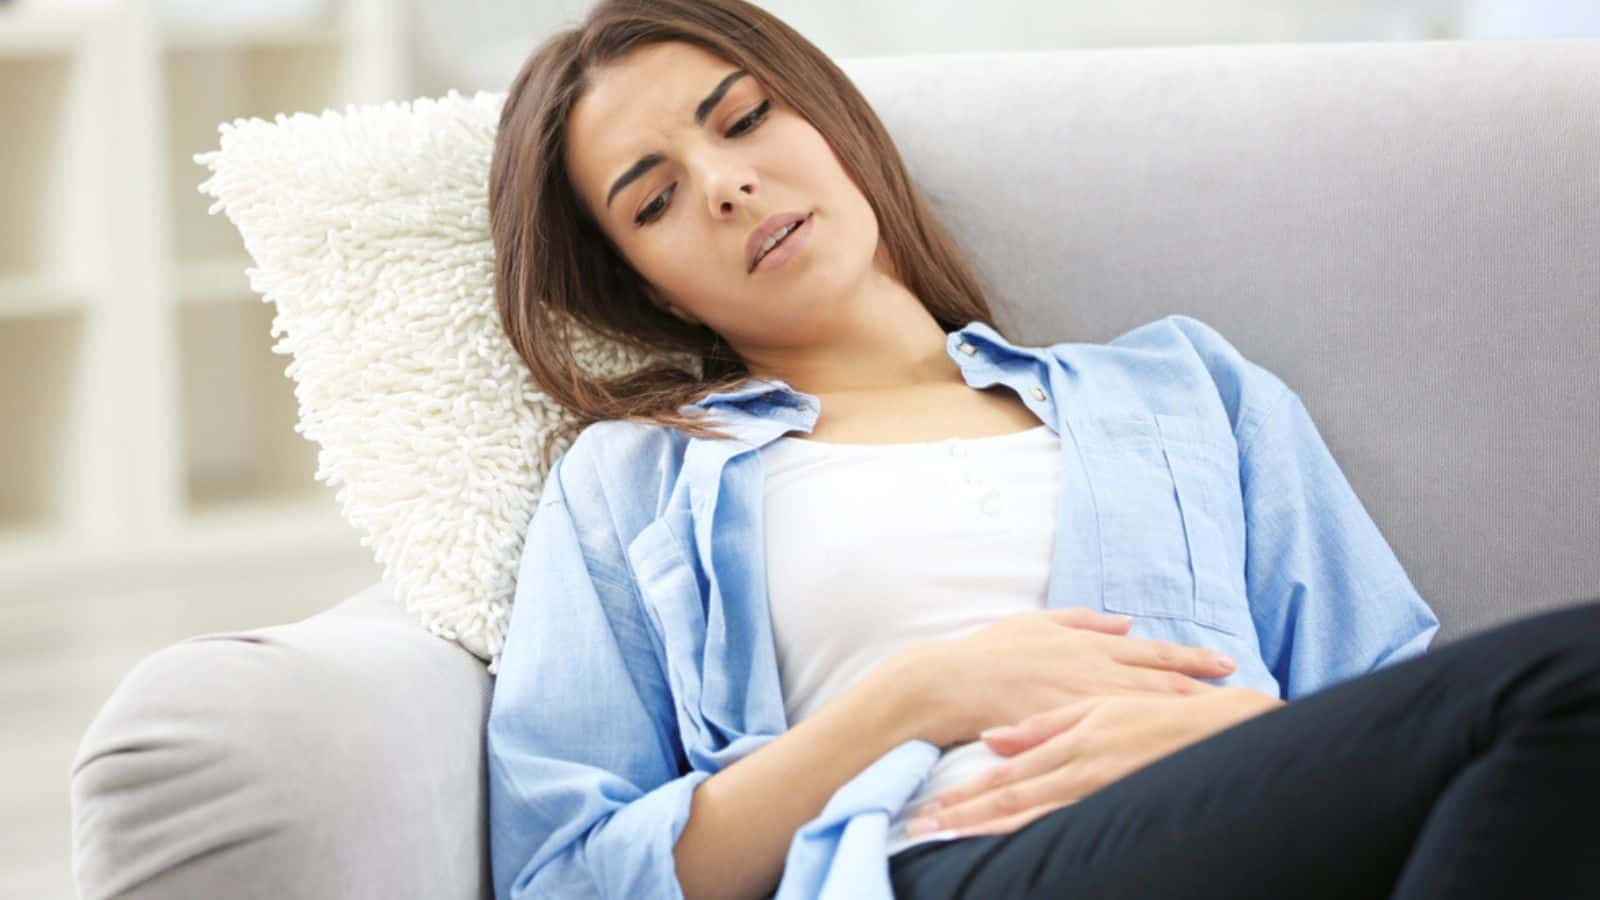 Young woman suffering from abdominal pain